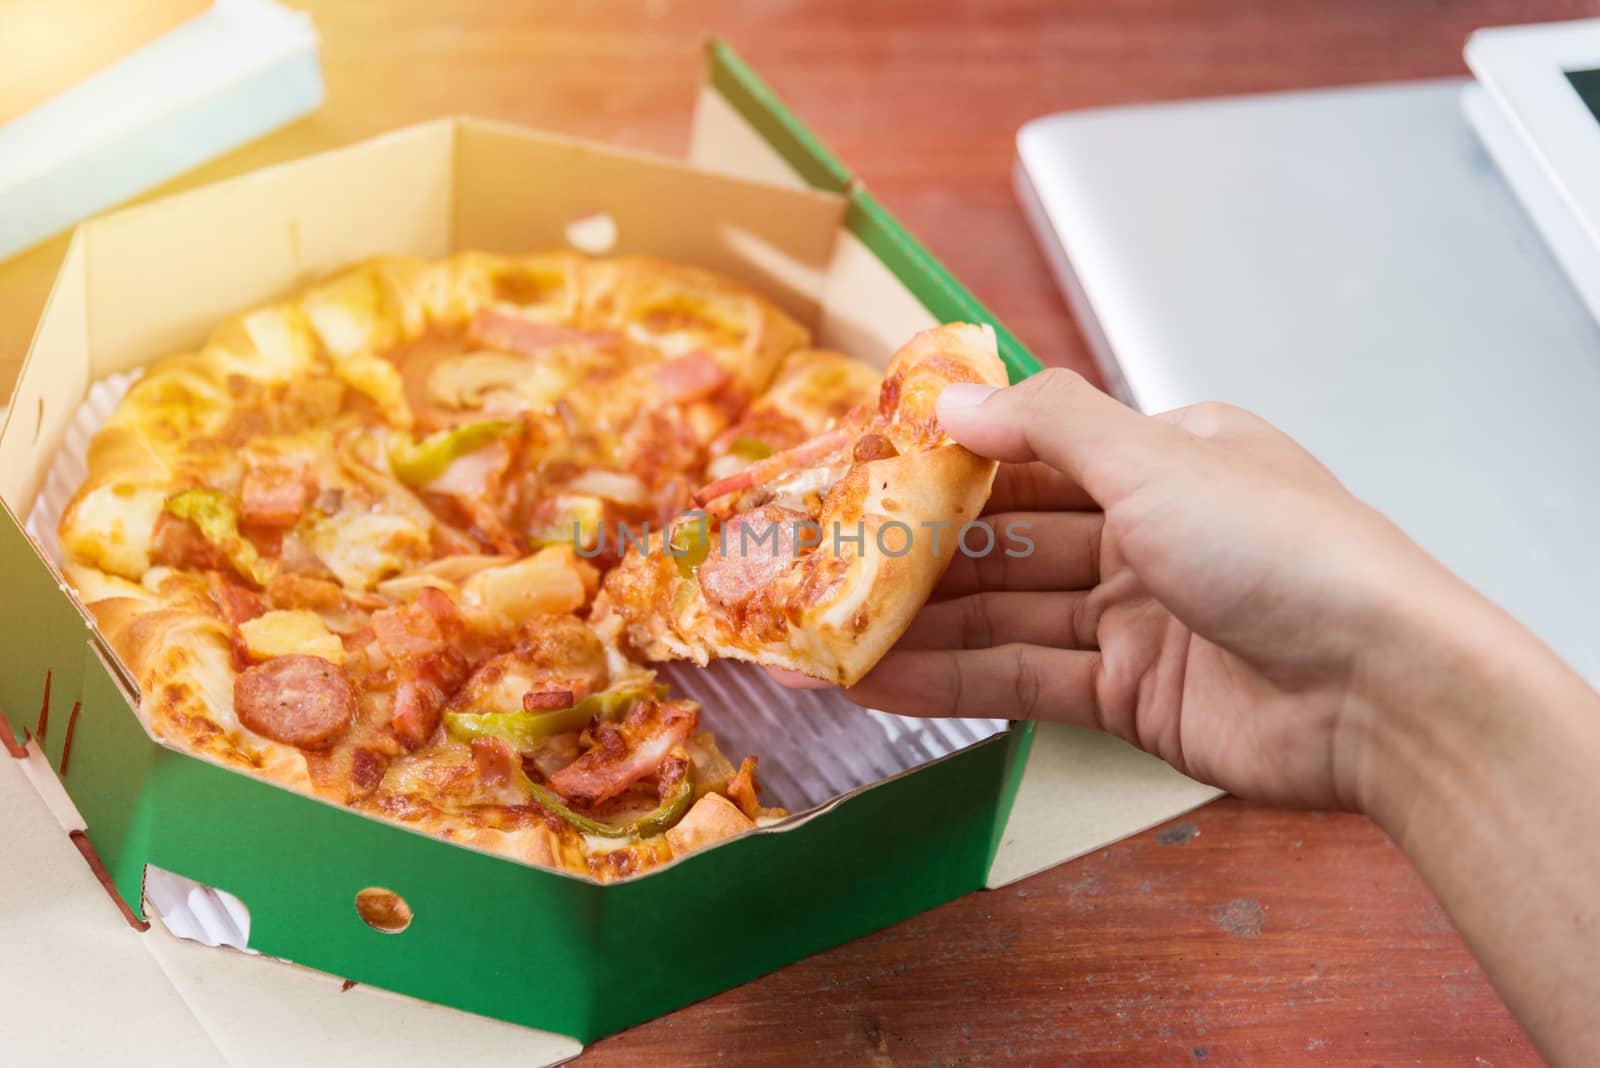 Hands taking pizza slices from green box